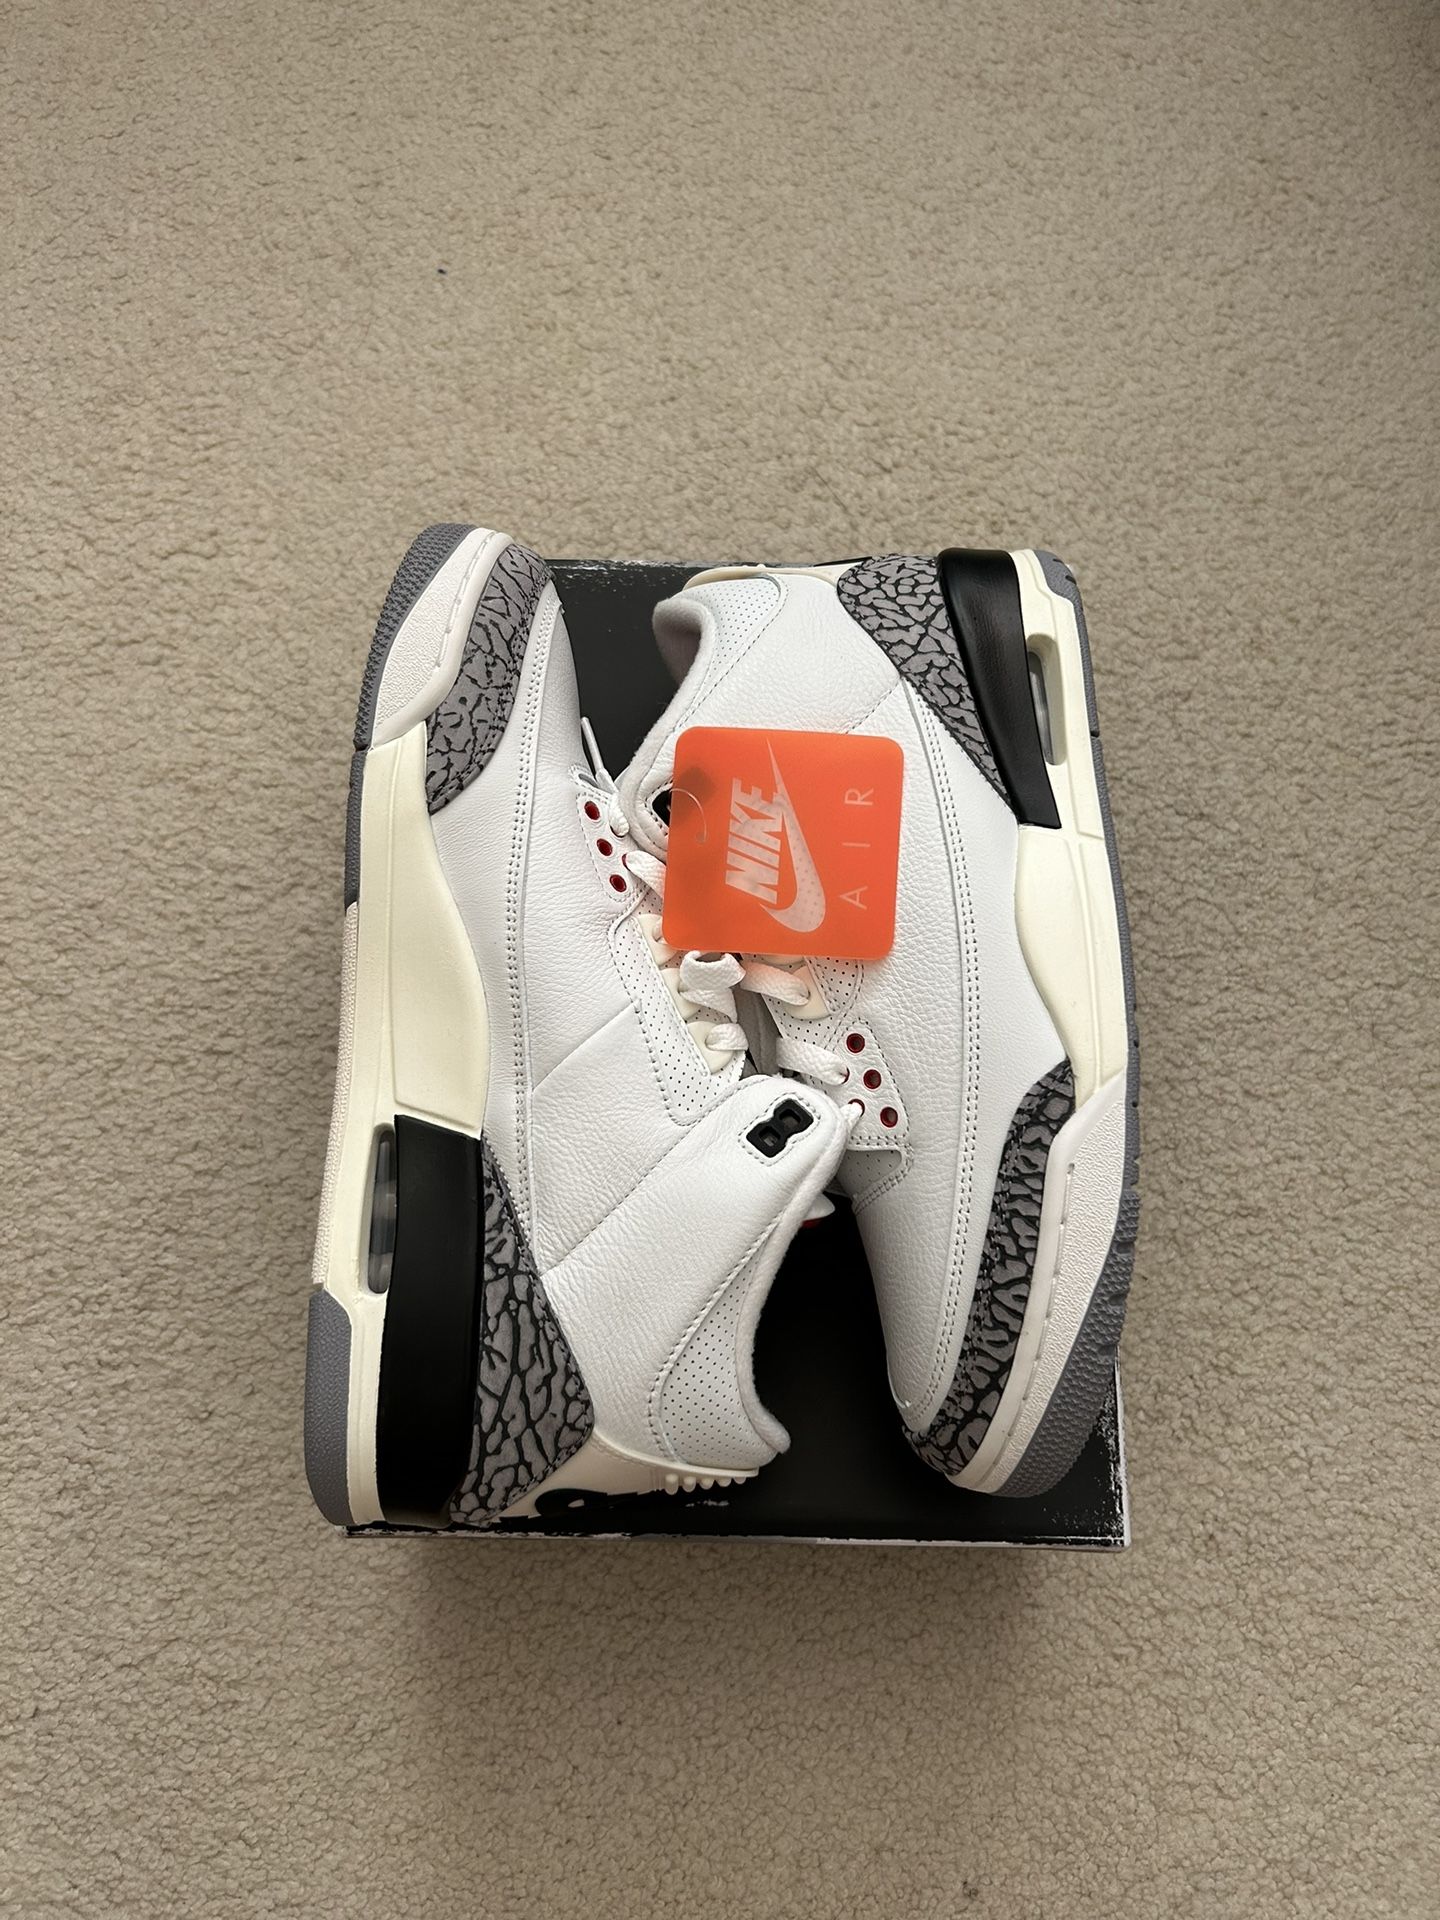 Air Jordan 3 White Cement “Reimagined” Size 10 DS (Brand New) - NO TRADES!